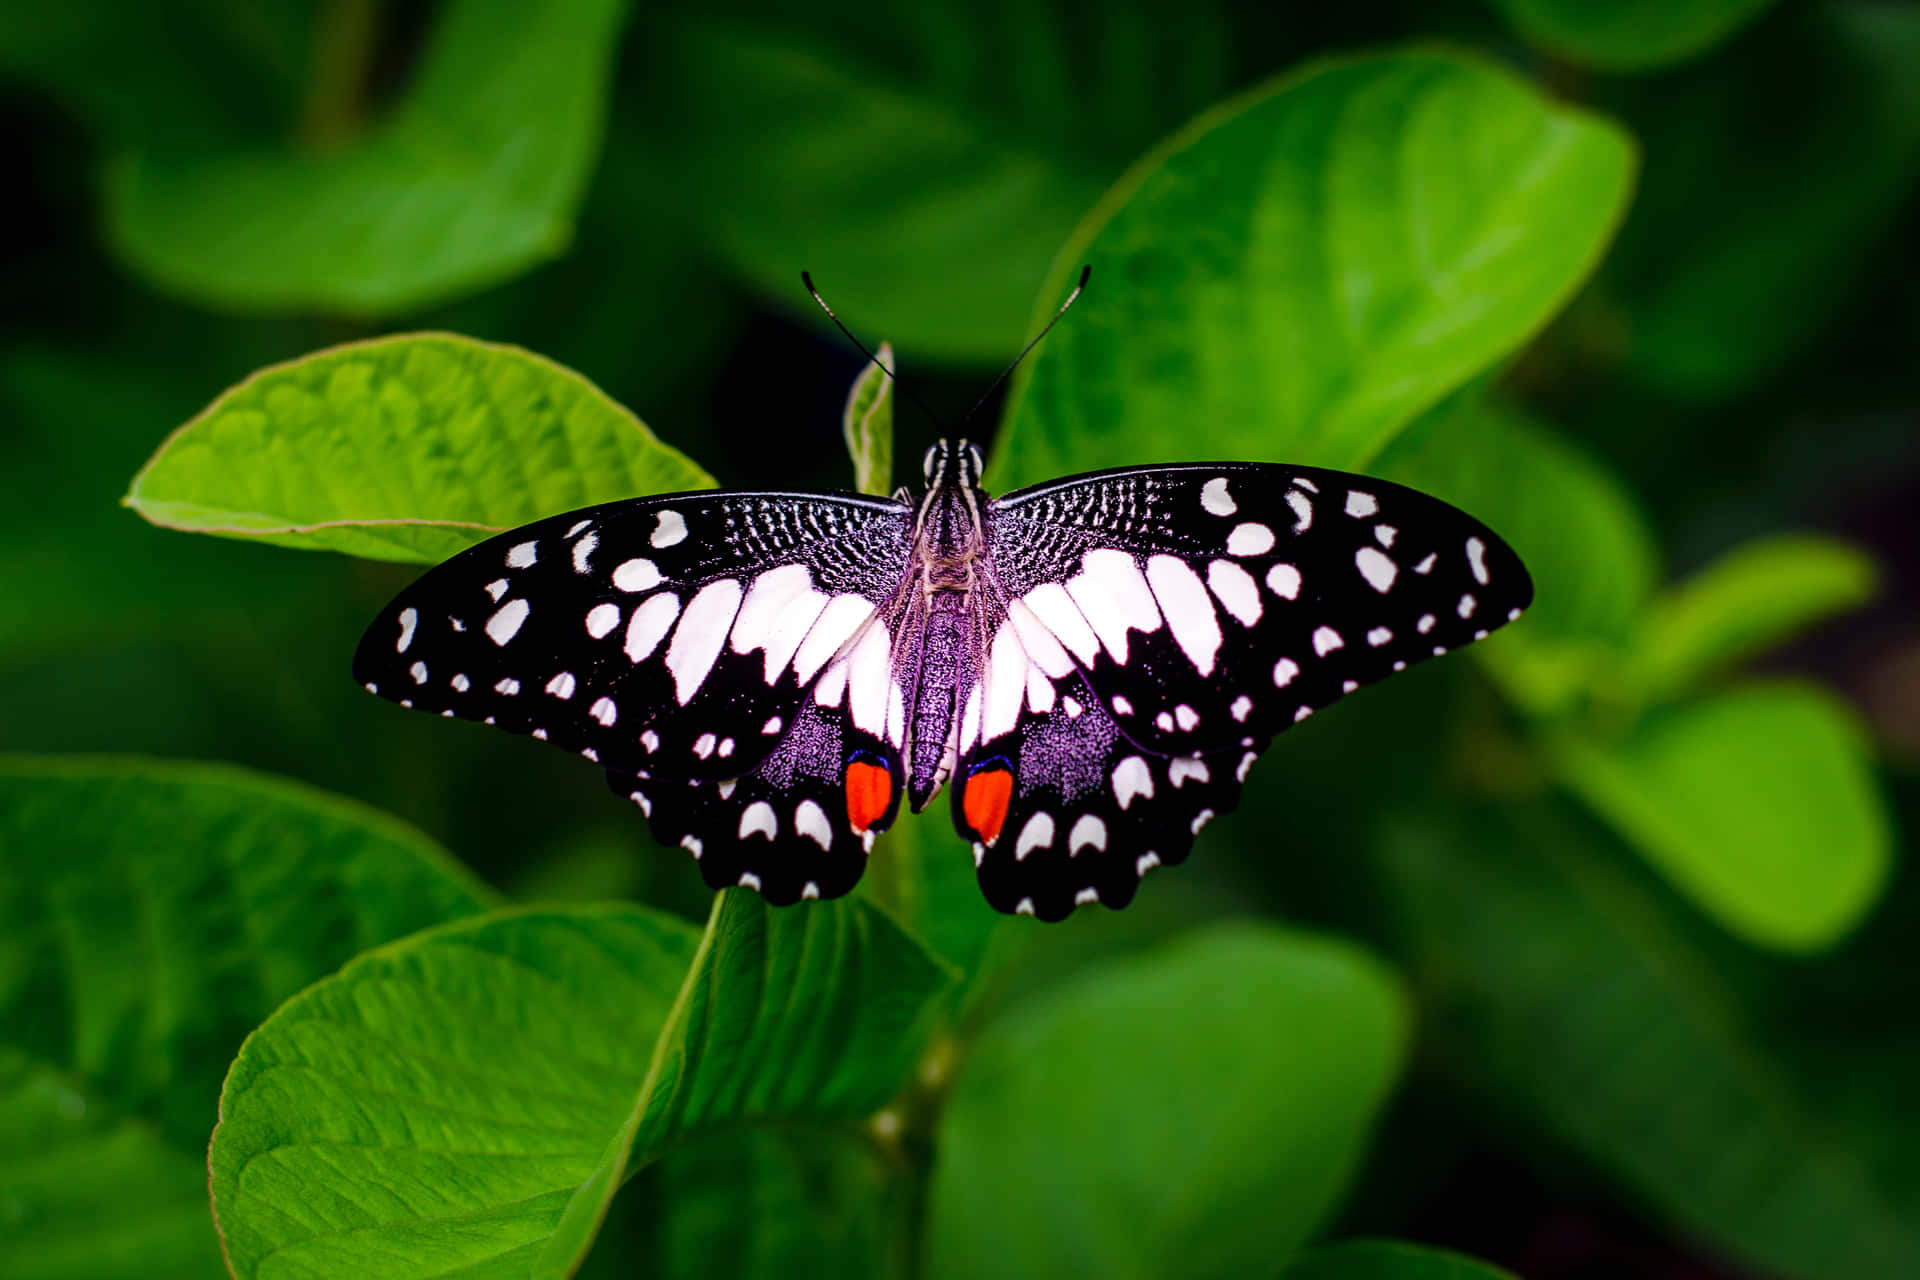 A vibrant and beautiful butterfly taking flight against a vibrant sky